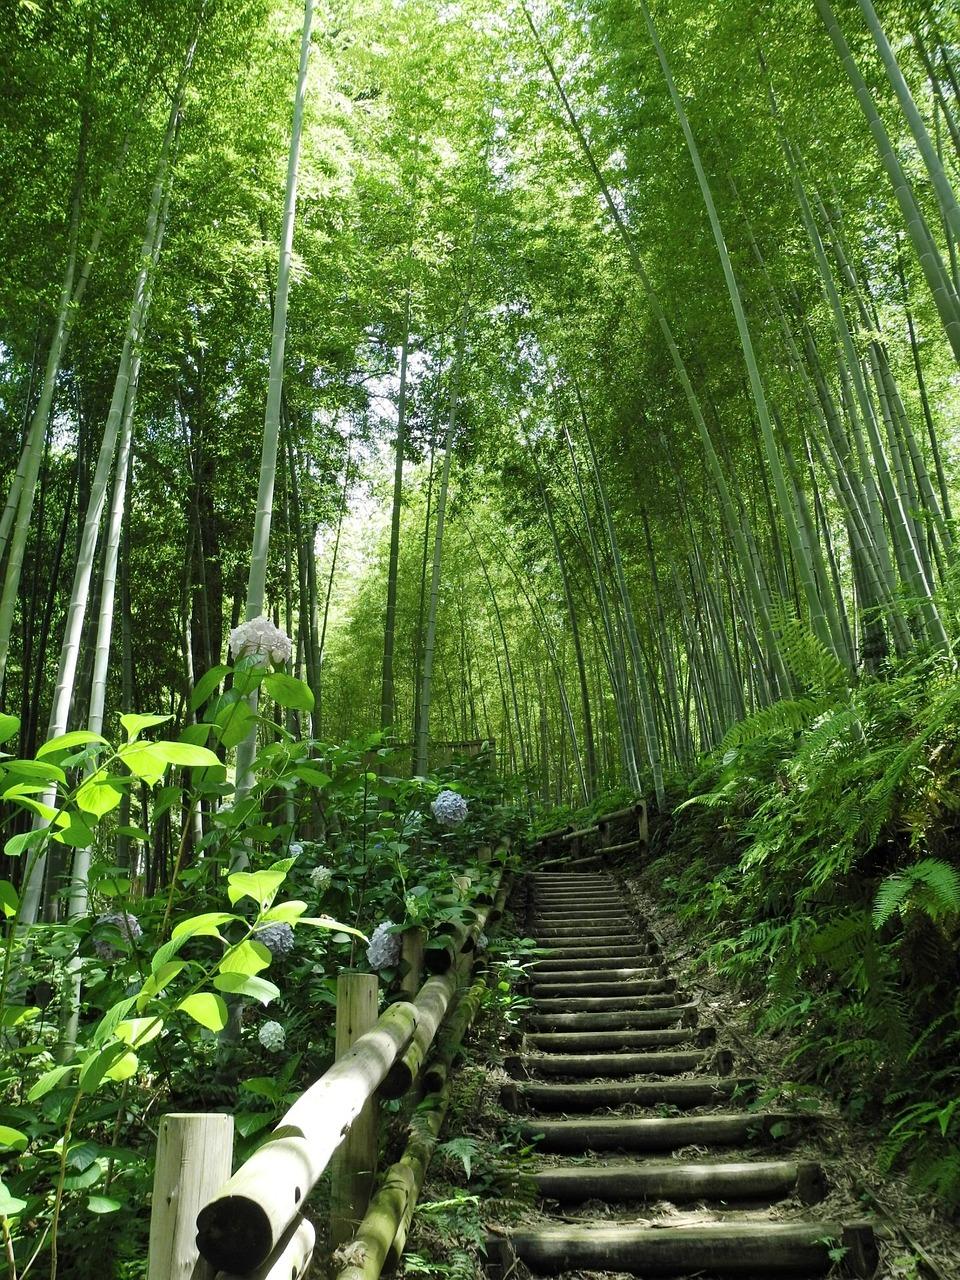 Dreaming of Navigating a Bamboo Wilderness